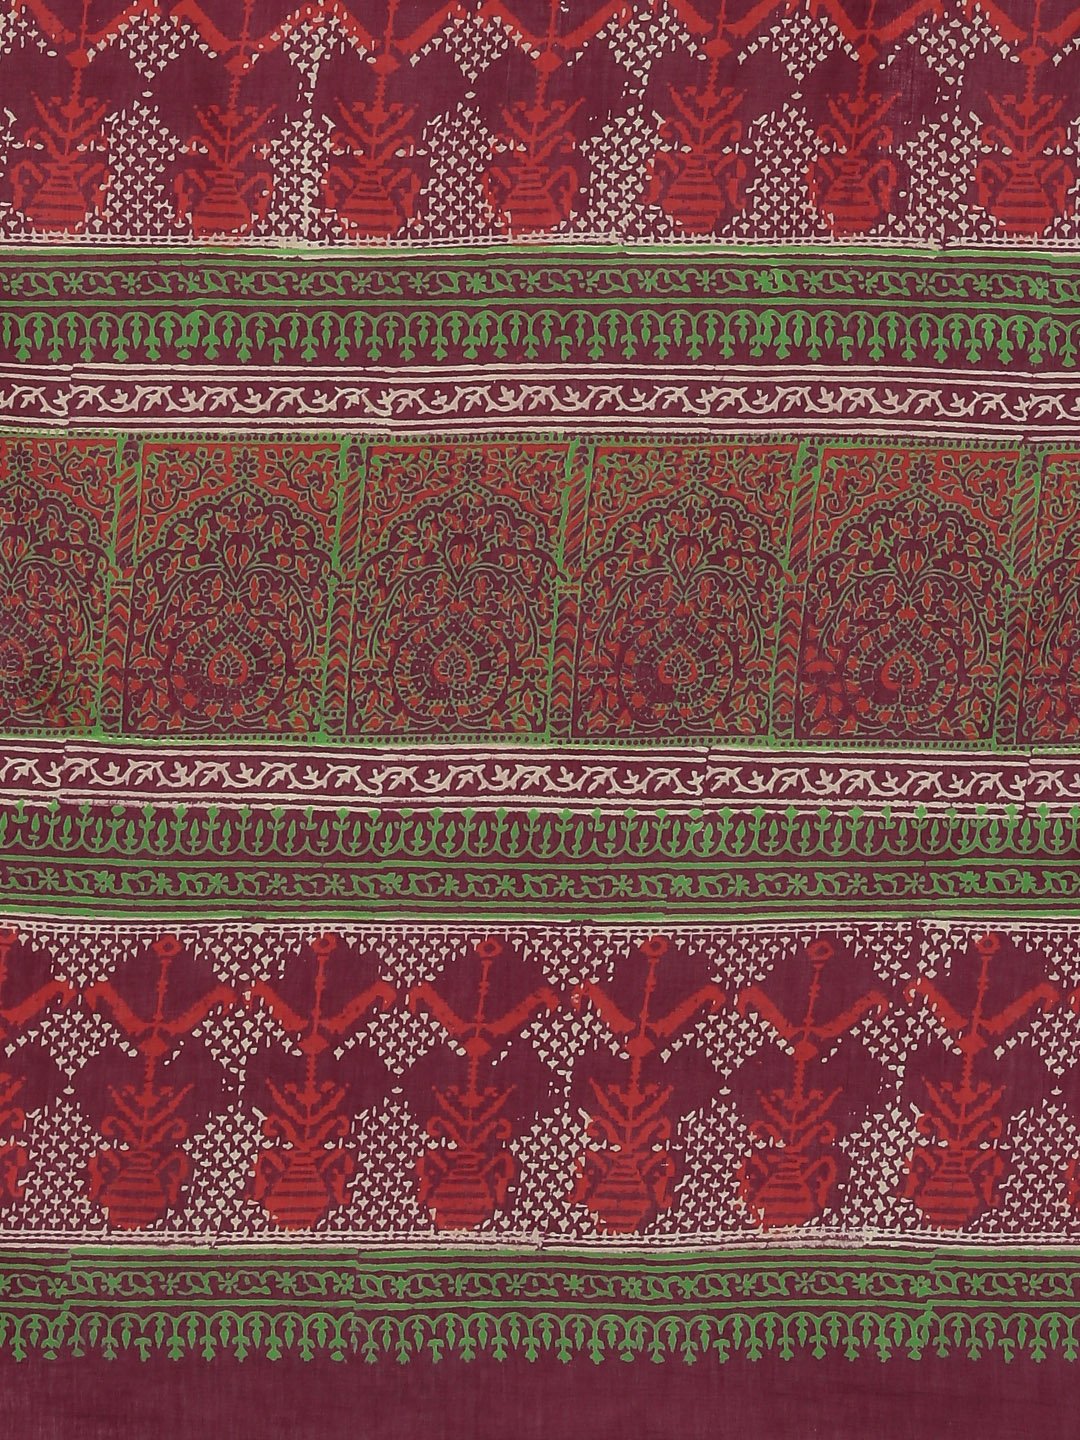 Maroon Beige Pure Cotton Hand Block Printed Dabu Saree-Saree-Kalakari India-BHKPSA0084-Cotton, Dabu, Geographical Indication, Hand Blocks, Hand Crafted, Heritage Prints, Indigo, Natural Dyes, Sarees, Sustainable Fabrics-[Linen,Ethnic,wear,Fashionista,Handloom,Handicraft,Indigo,blockprint,block,print,Cotton,Chanderi,Blue, latest,classy,party,bollywood,trendy,summer,style,traditional,formal,elegant,unique,style,hand,block,print, dabu,booti,gift,present,glamorous,affordable,collectible,Sari,Saree,p